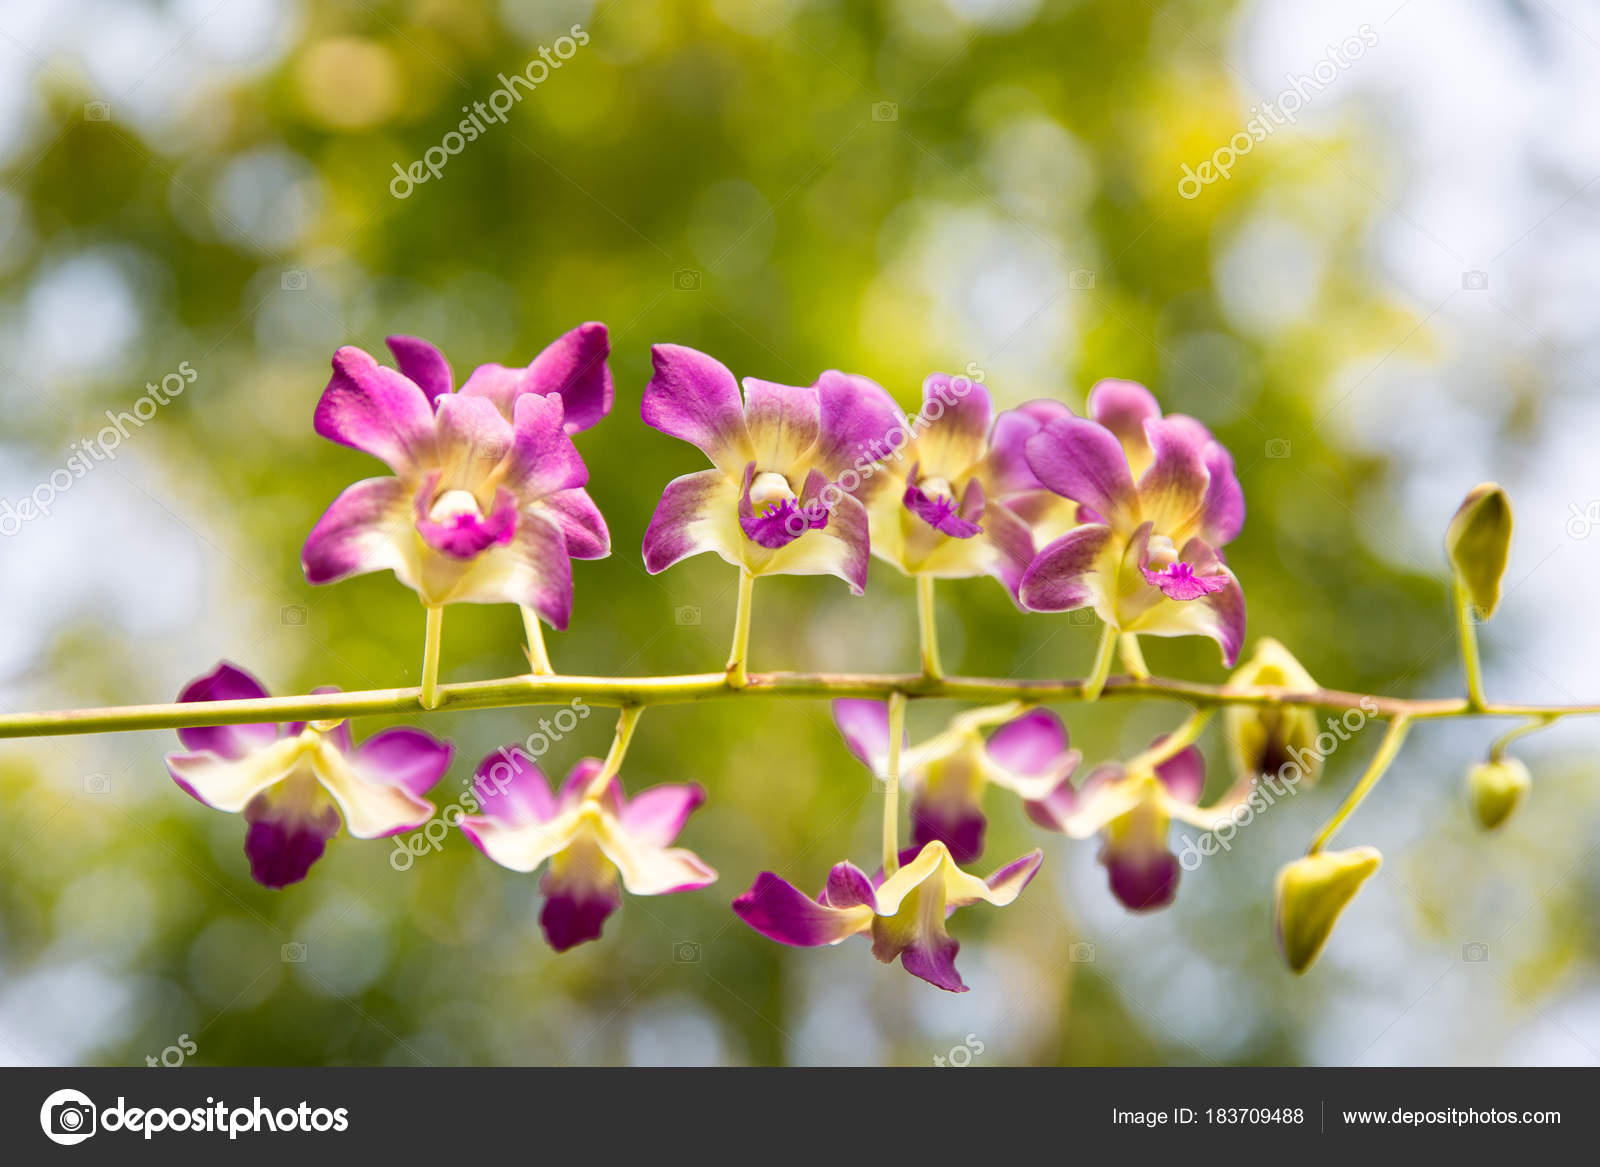 Light Purple Color Phalaenopsis Orchid Flowers With Natural Gree Stock Photo C Djetawat 183709488